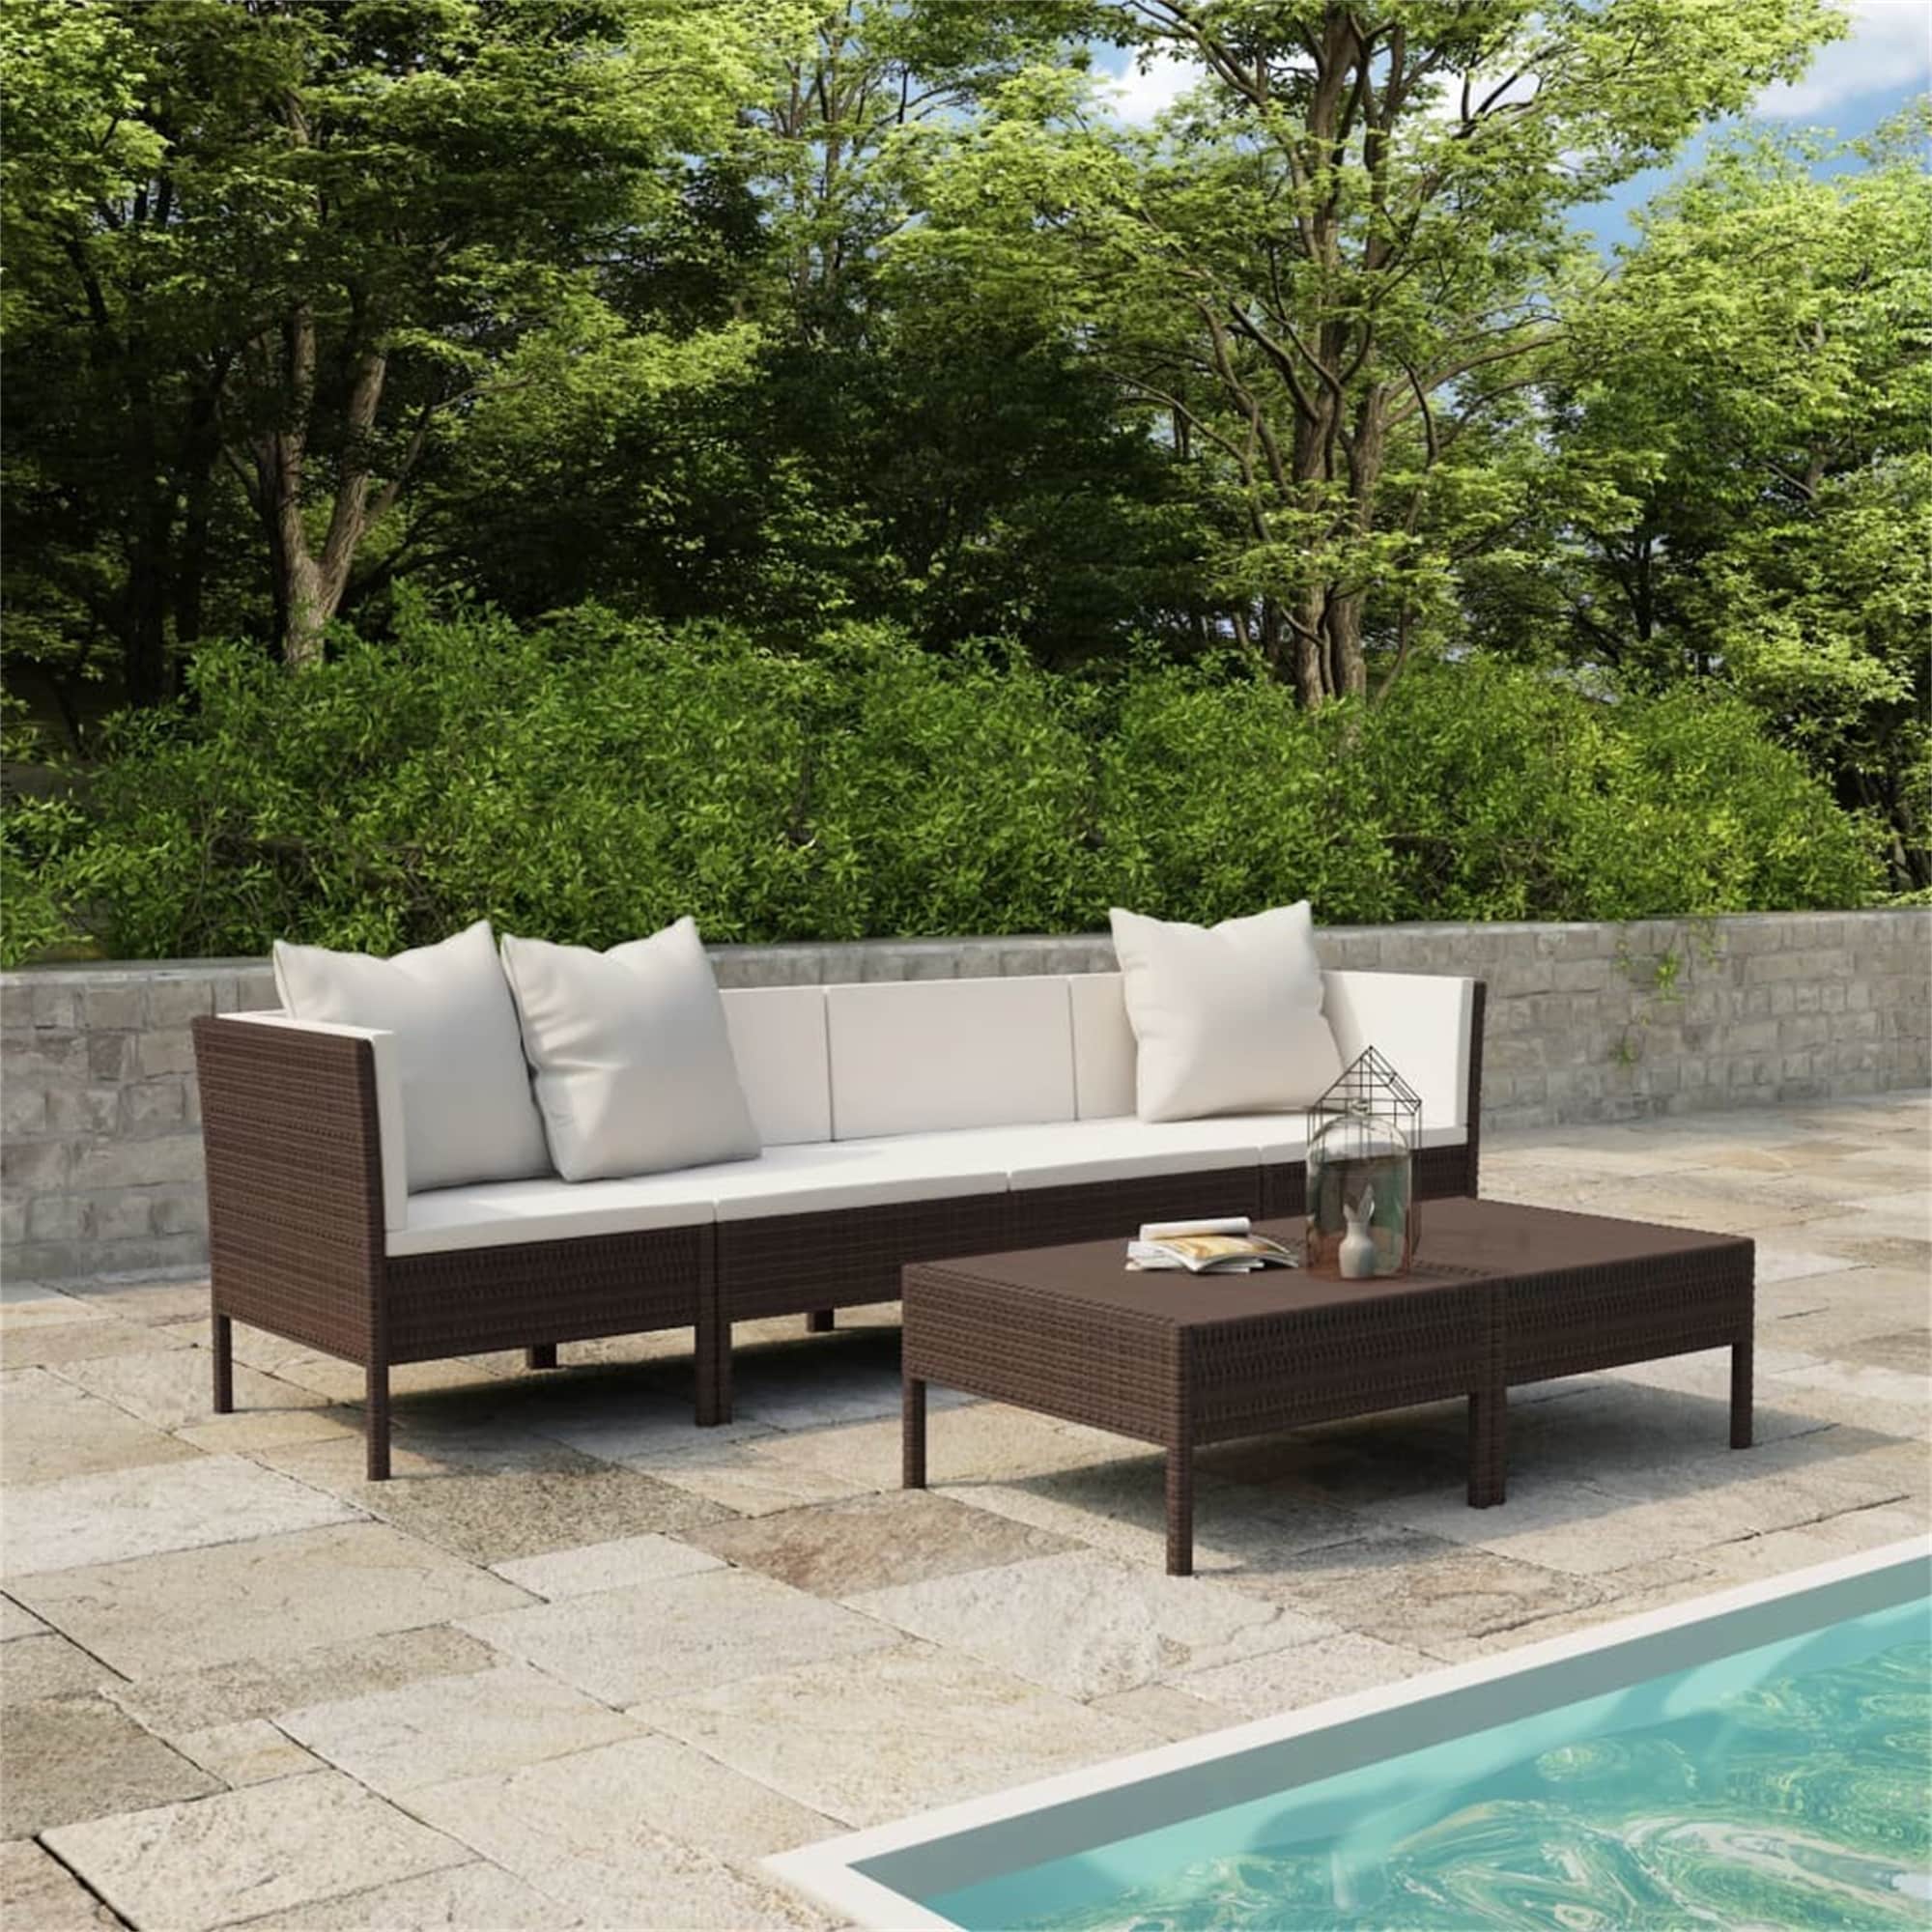 6 Piece Garden Lounge Set With Cushions Rattan  Coffee Table  Brown